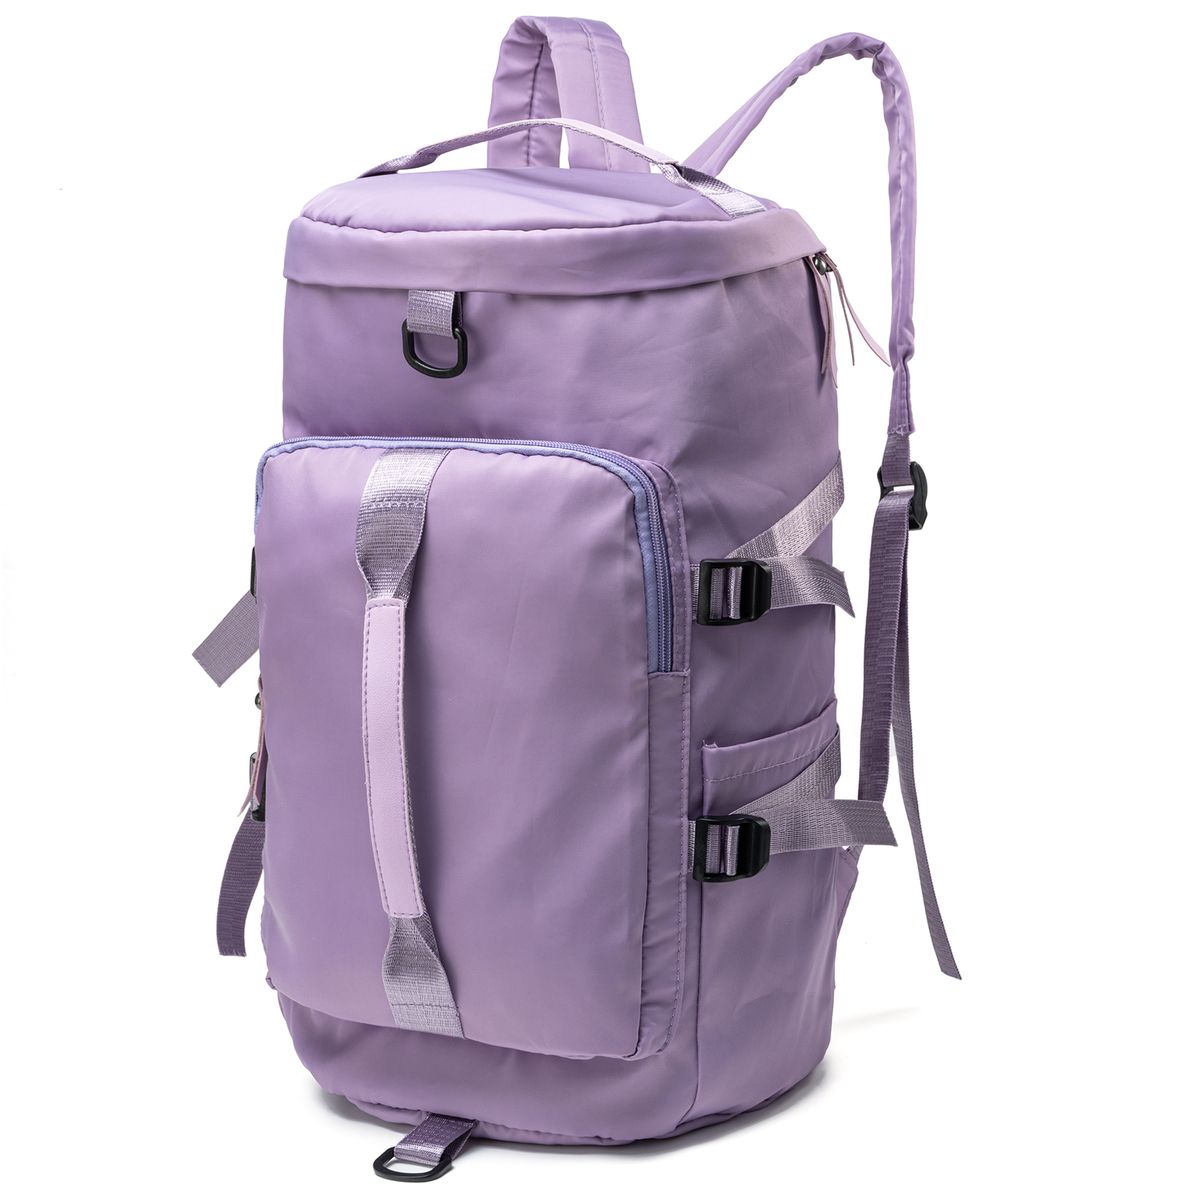 Women Backpack Travel Luggage Bag with Shoe Compartment-30L | Shop ...